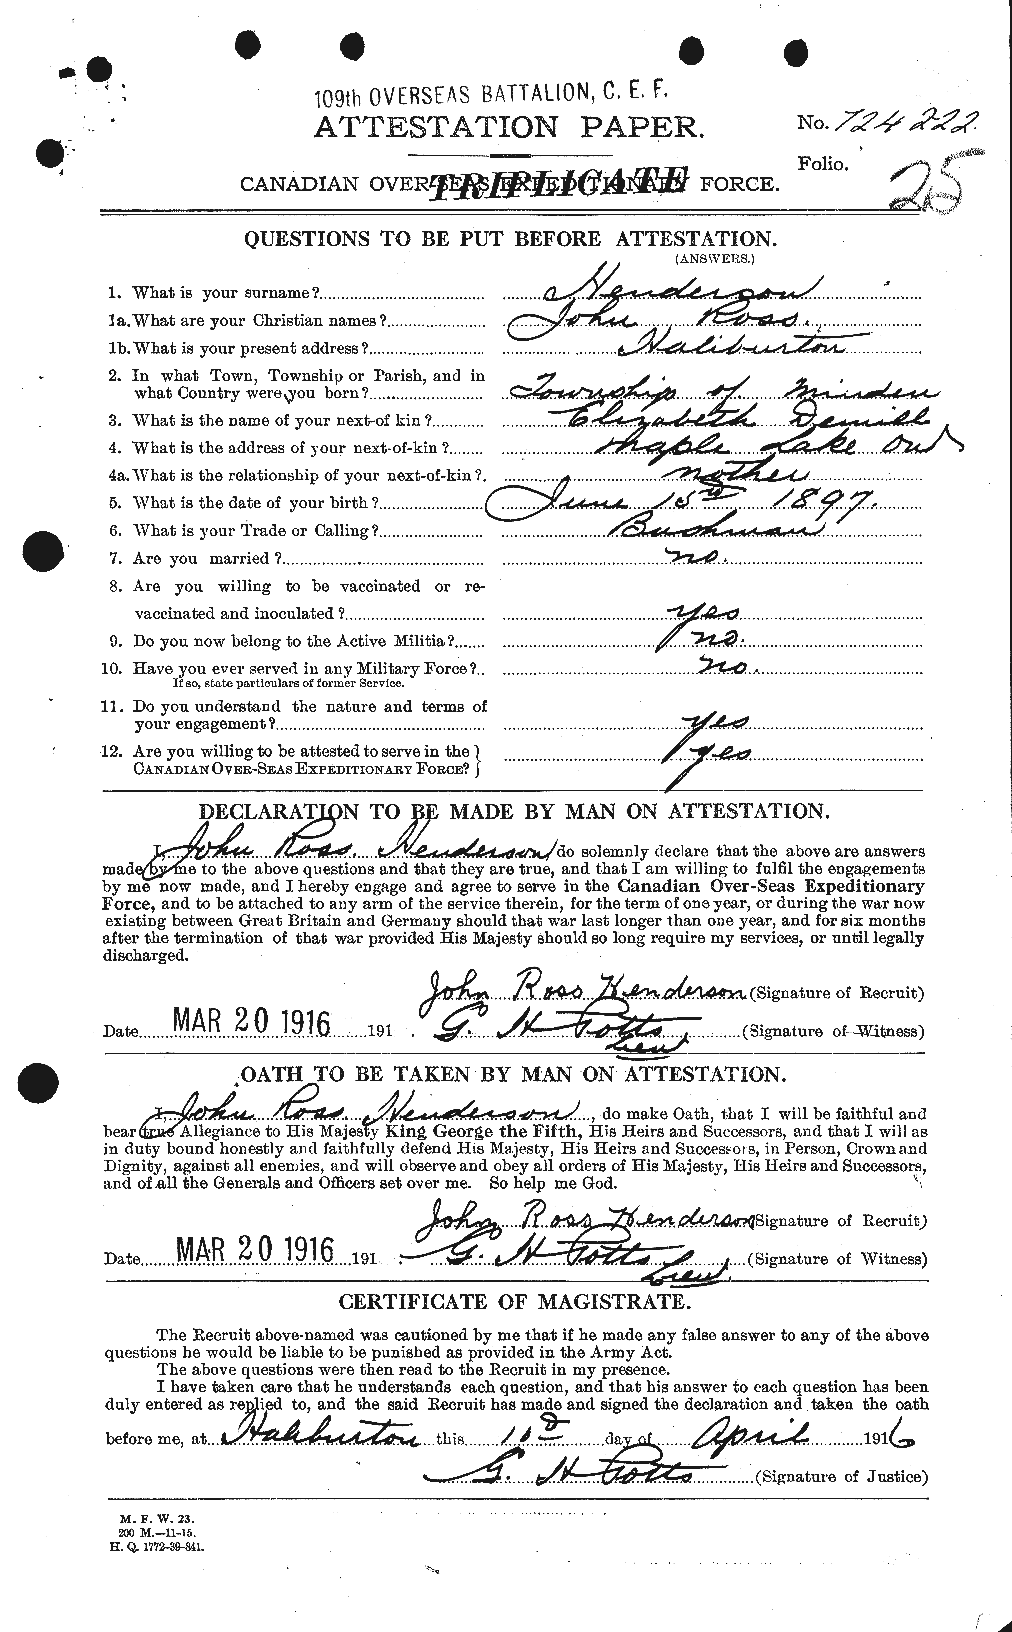 Personnel Records of the First World War - CEF 392554a